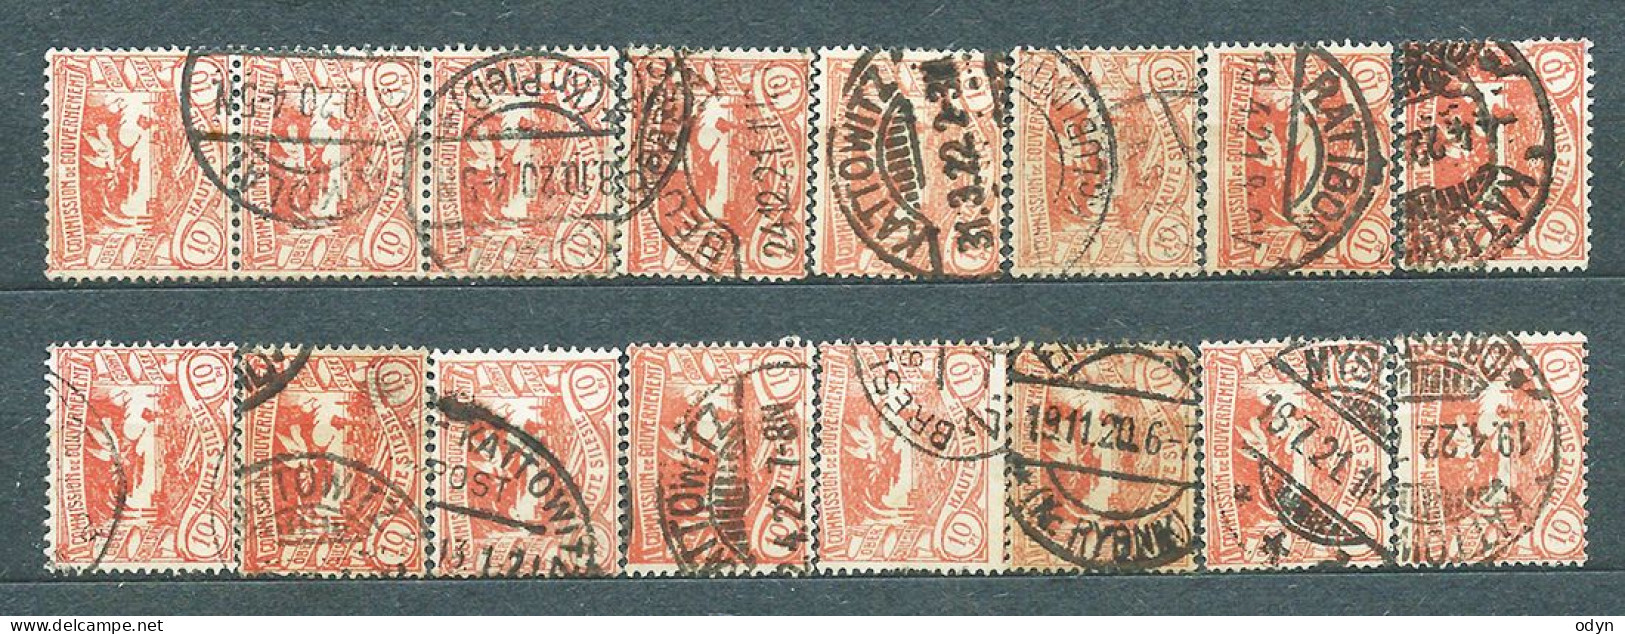 Plebiscite, Upper Silesia, 1920; Lot Of 287 Stamps From Set MiNr 13-29 - Used - Silezië